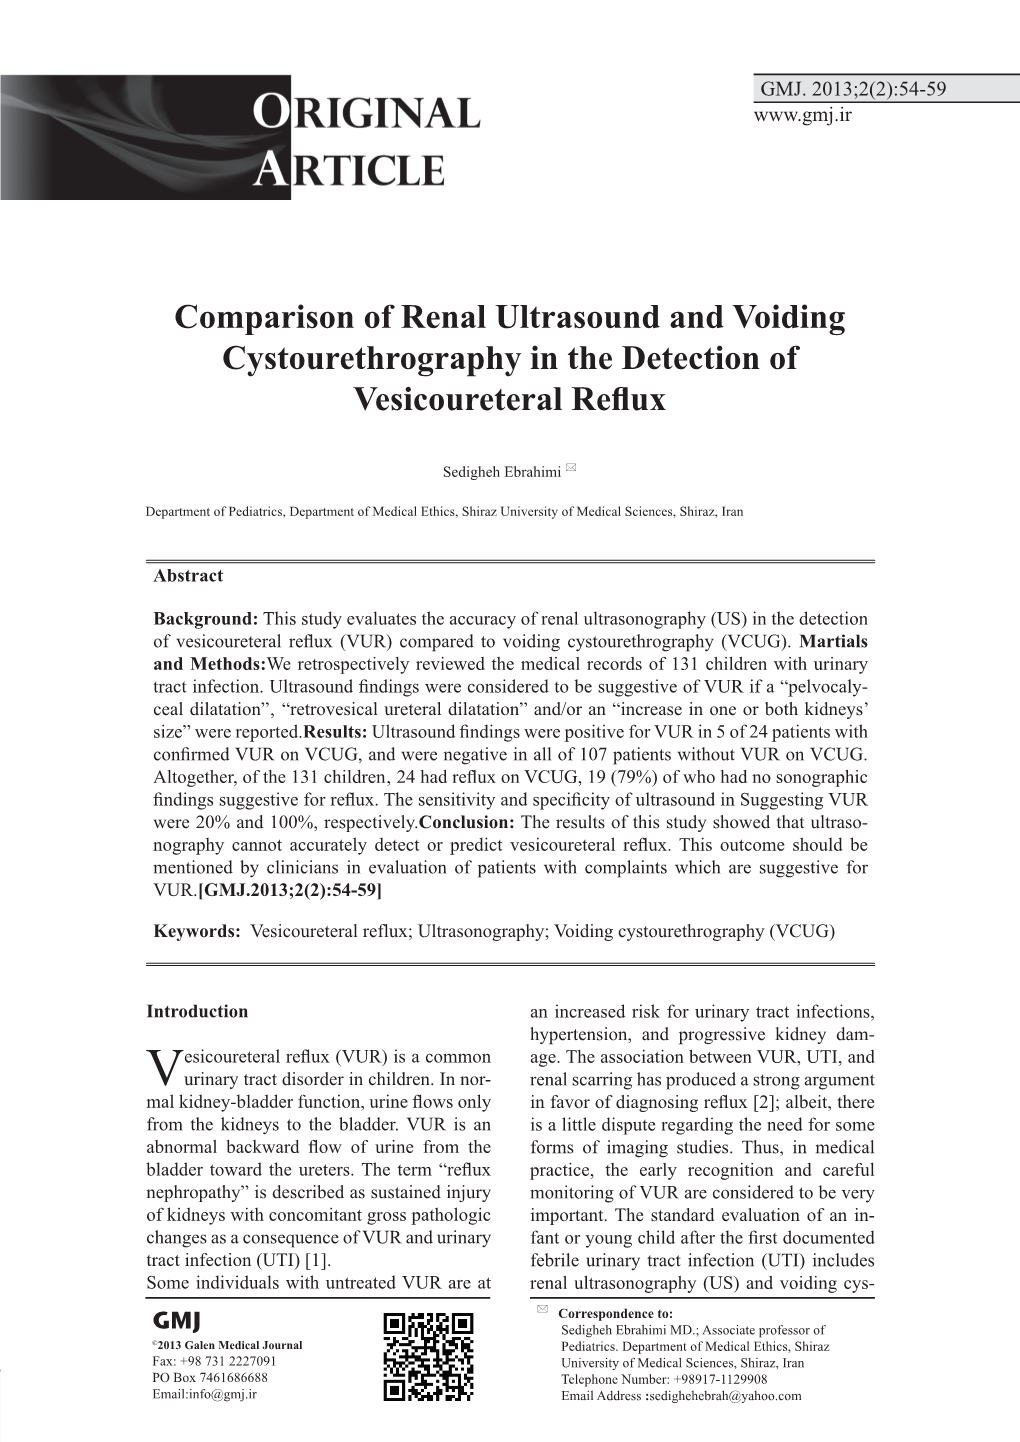 Comparison of Renal Ultrasound and Voiding Cystourethrography in the Detection of Vesicoureteral Reflux